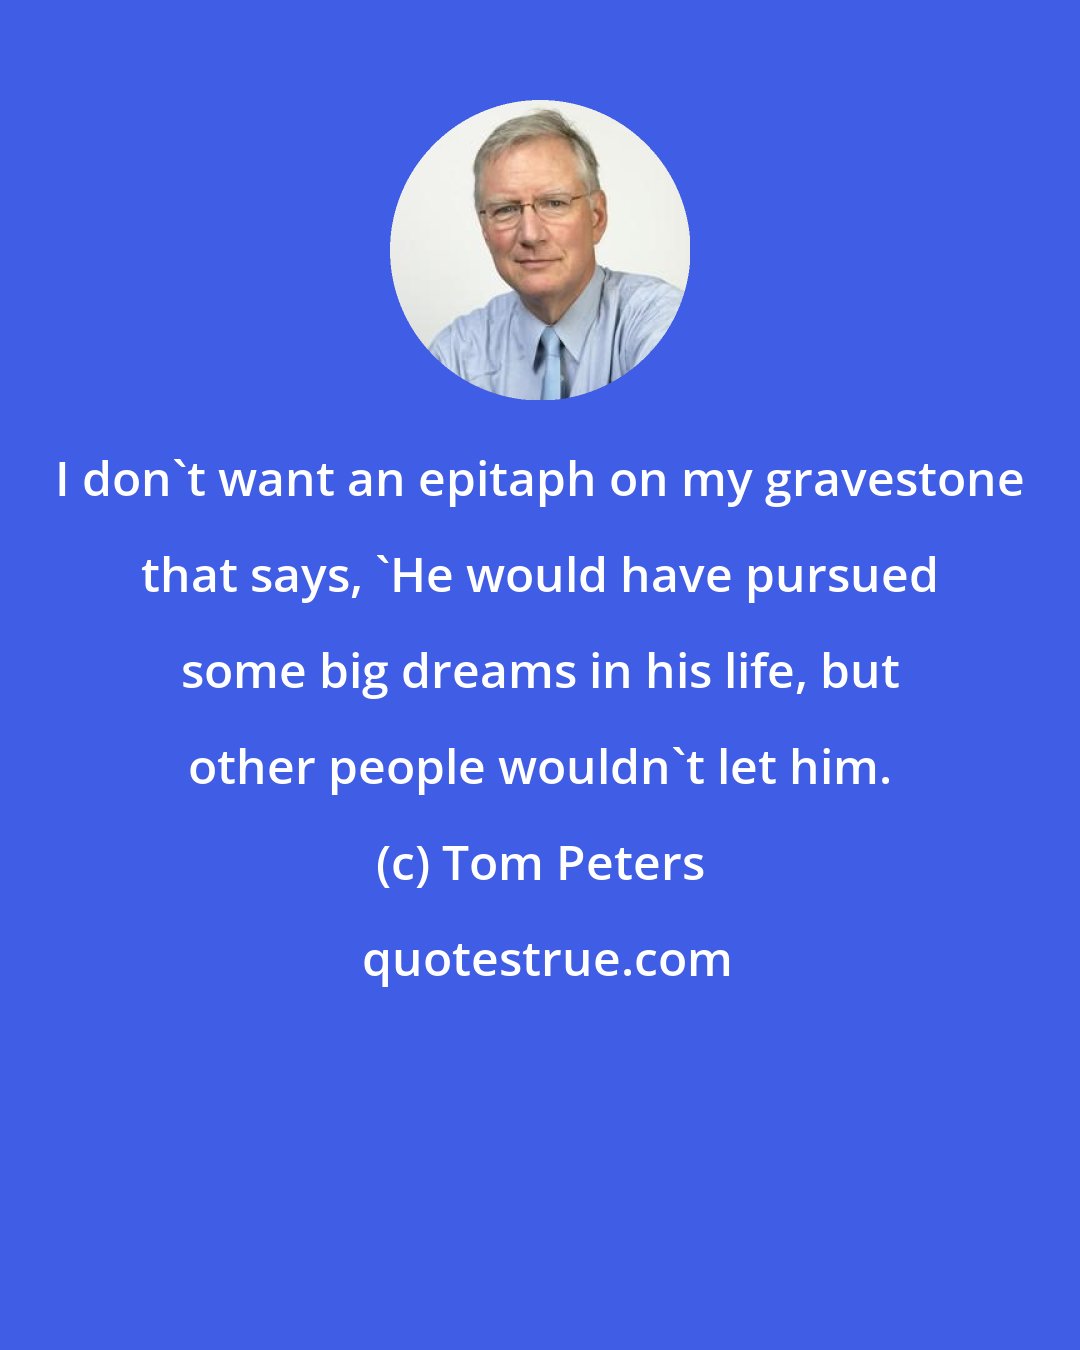 Tom Peters: I don't want an epitaph on my gravestone that says, 'He would have pursued some big dreams in his life, but other people wouldn't let him.